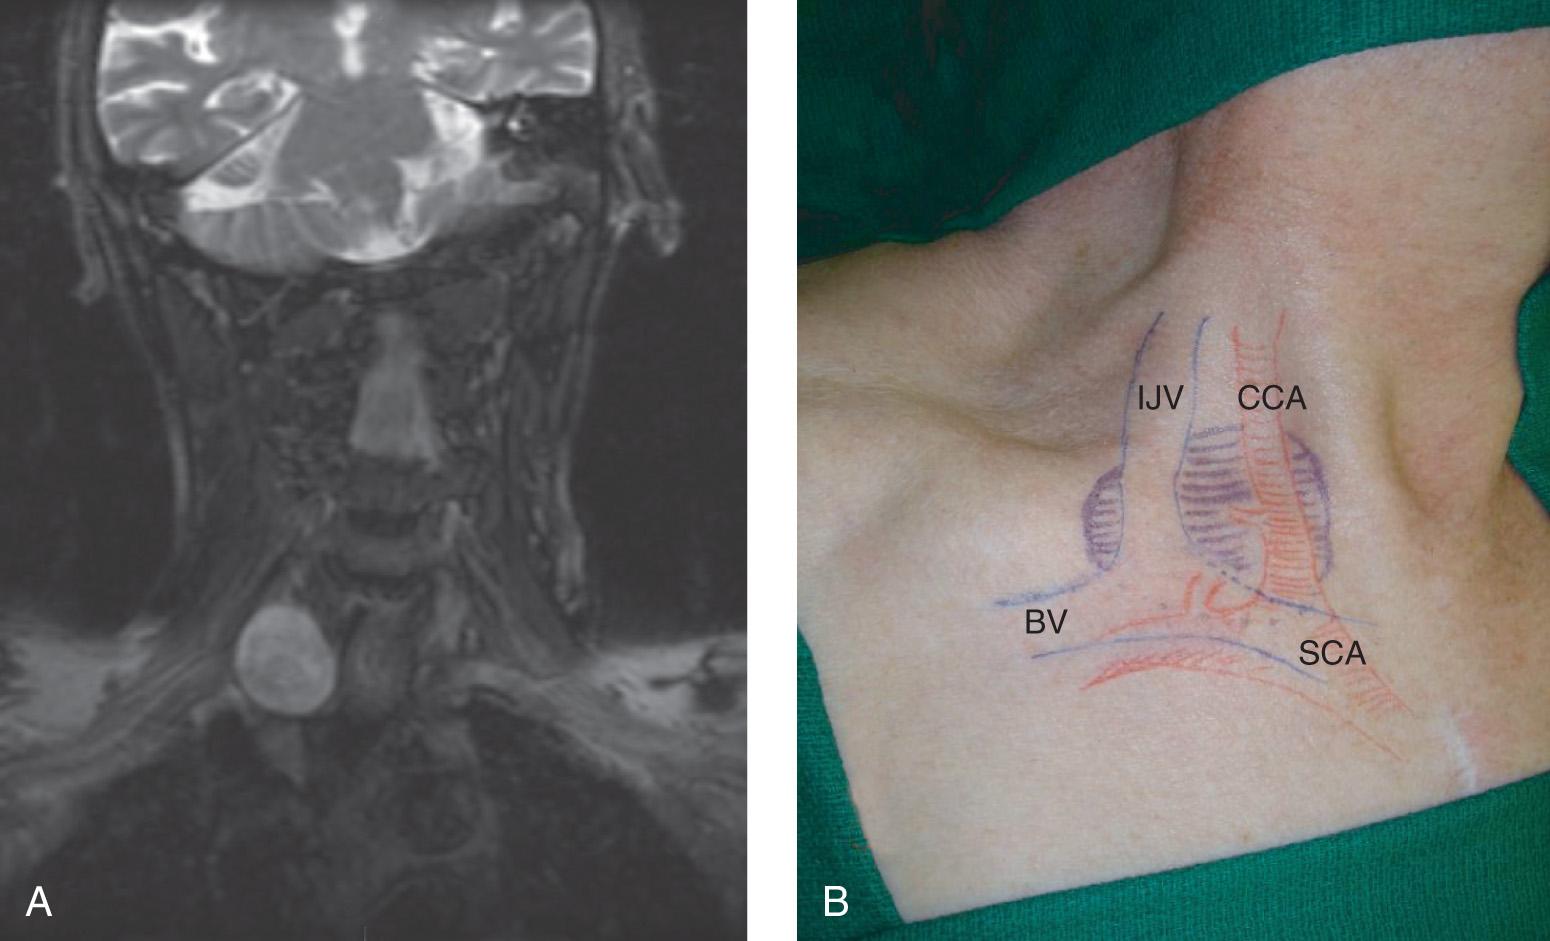 Figure 14.27, A , Coronal view of the magnetic resonance image of the tumor shown in Fig. 14.28 demonstrates a well-circumscribed “round” tumor in the lower part of the neck. B , Outline of the relationship of the tumor to great vessels in the lower part of the neck. BV, Brachial vein; CCA, common carotid artery; IJV, internal jugular vein; SCA, subclavian artery.